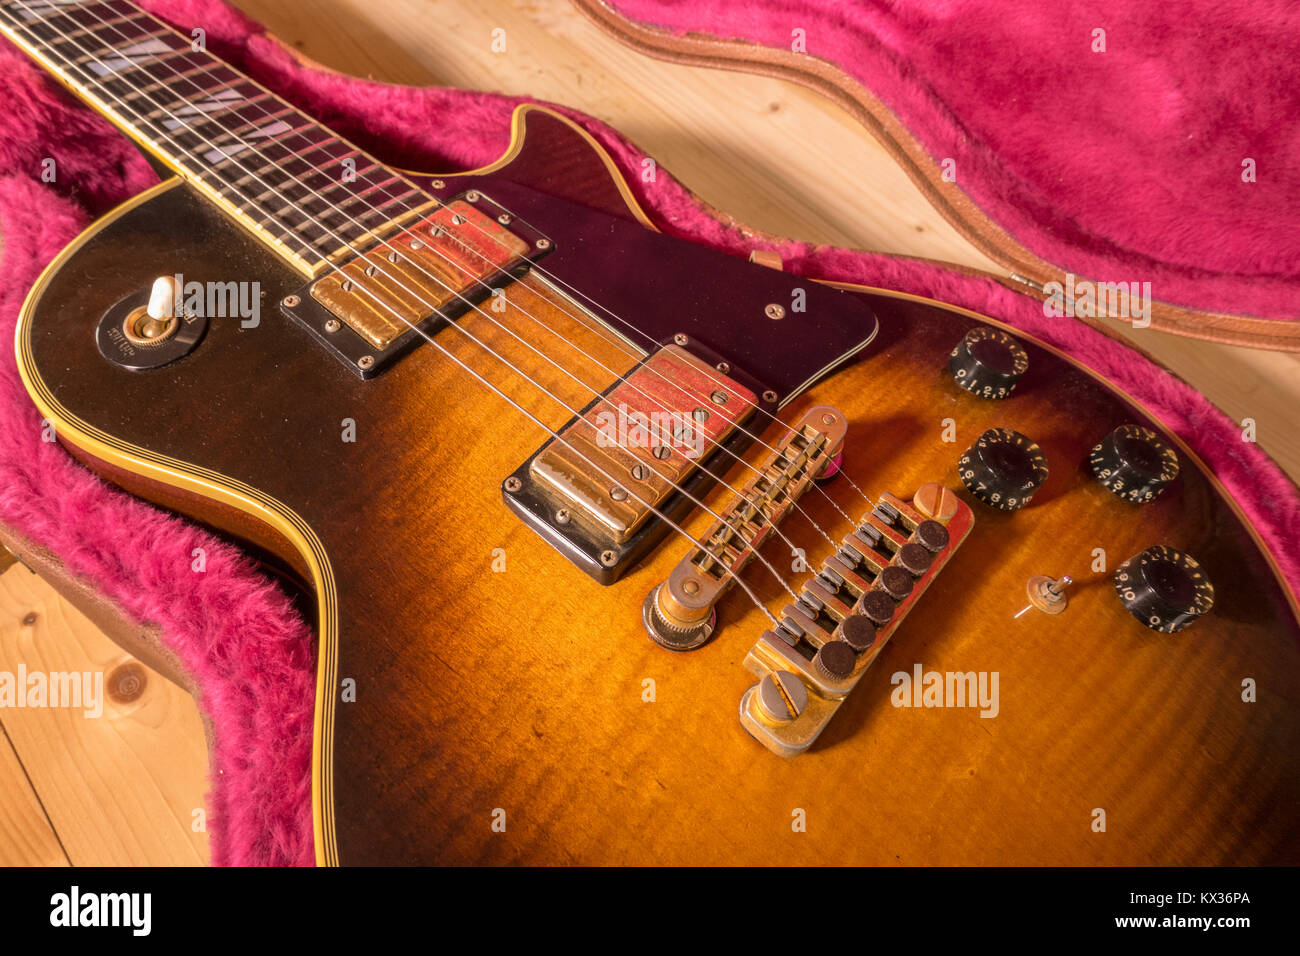 Gibson Les Paul vintage electric guitar, in shaped soft lined hard case. Antique sunburst 25/50 anniversary model, made in the USA, manufactured 1978. Stock Photo